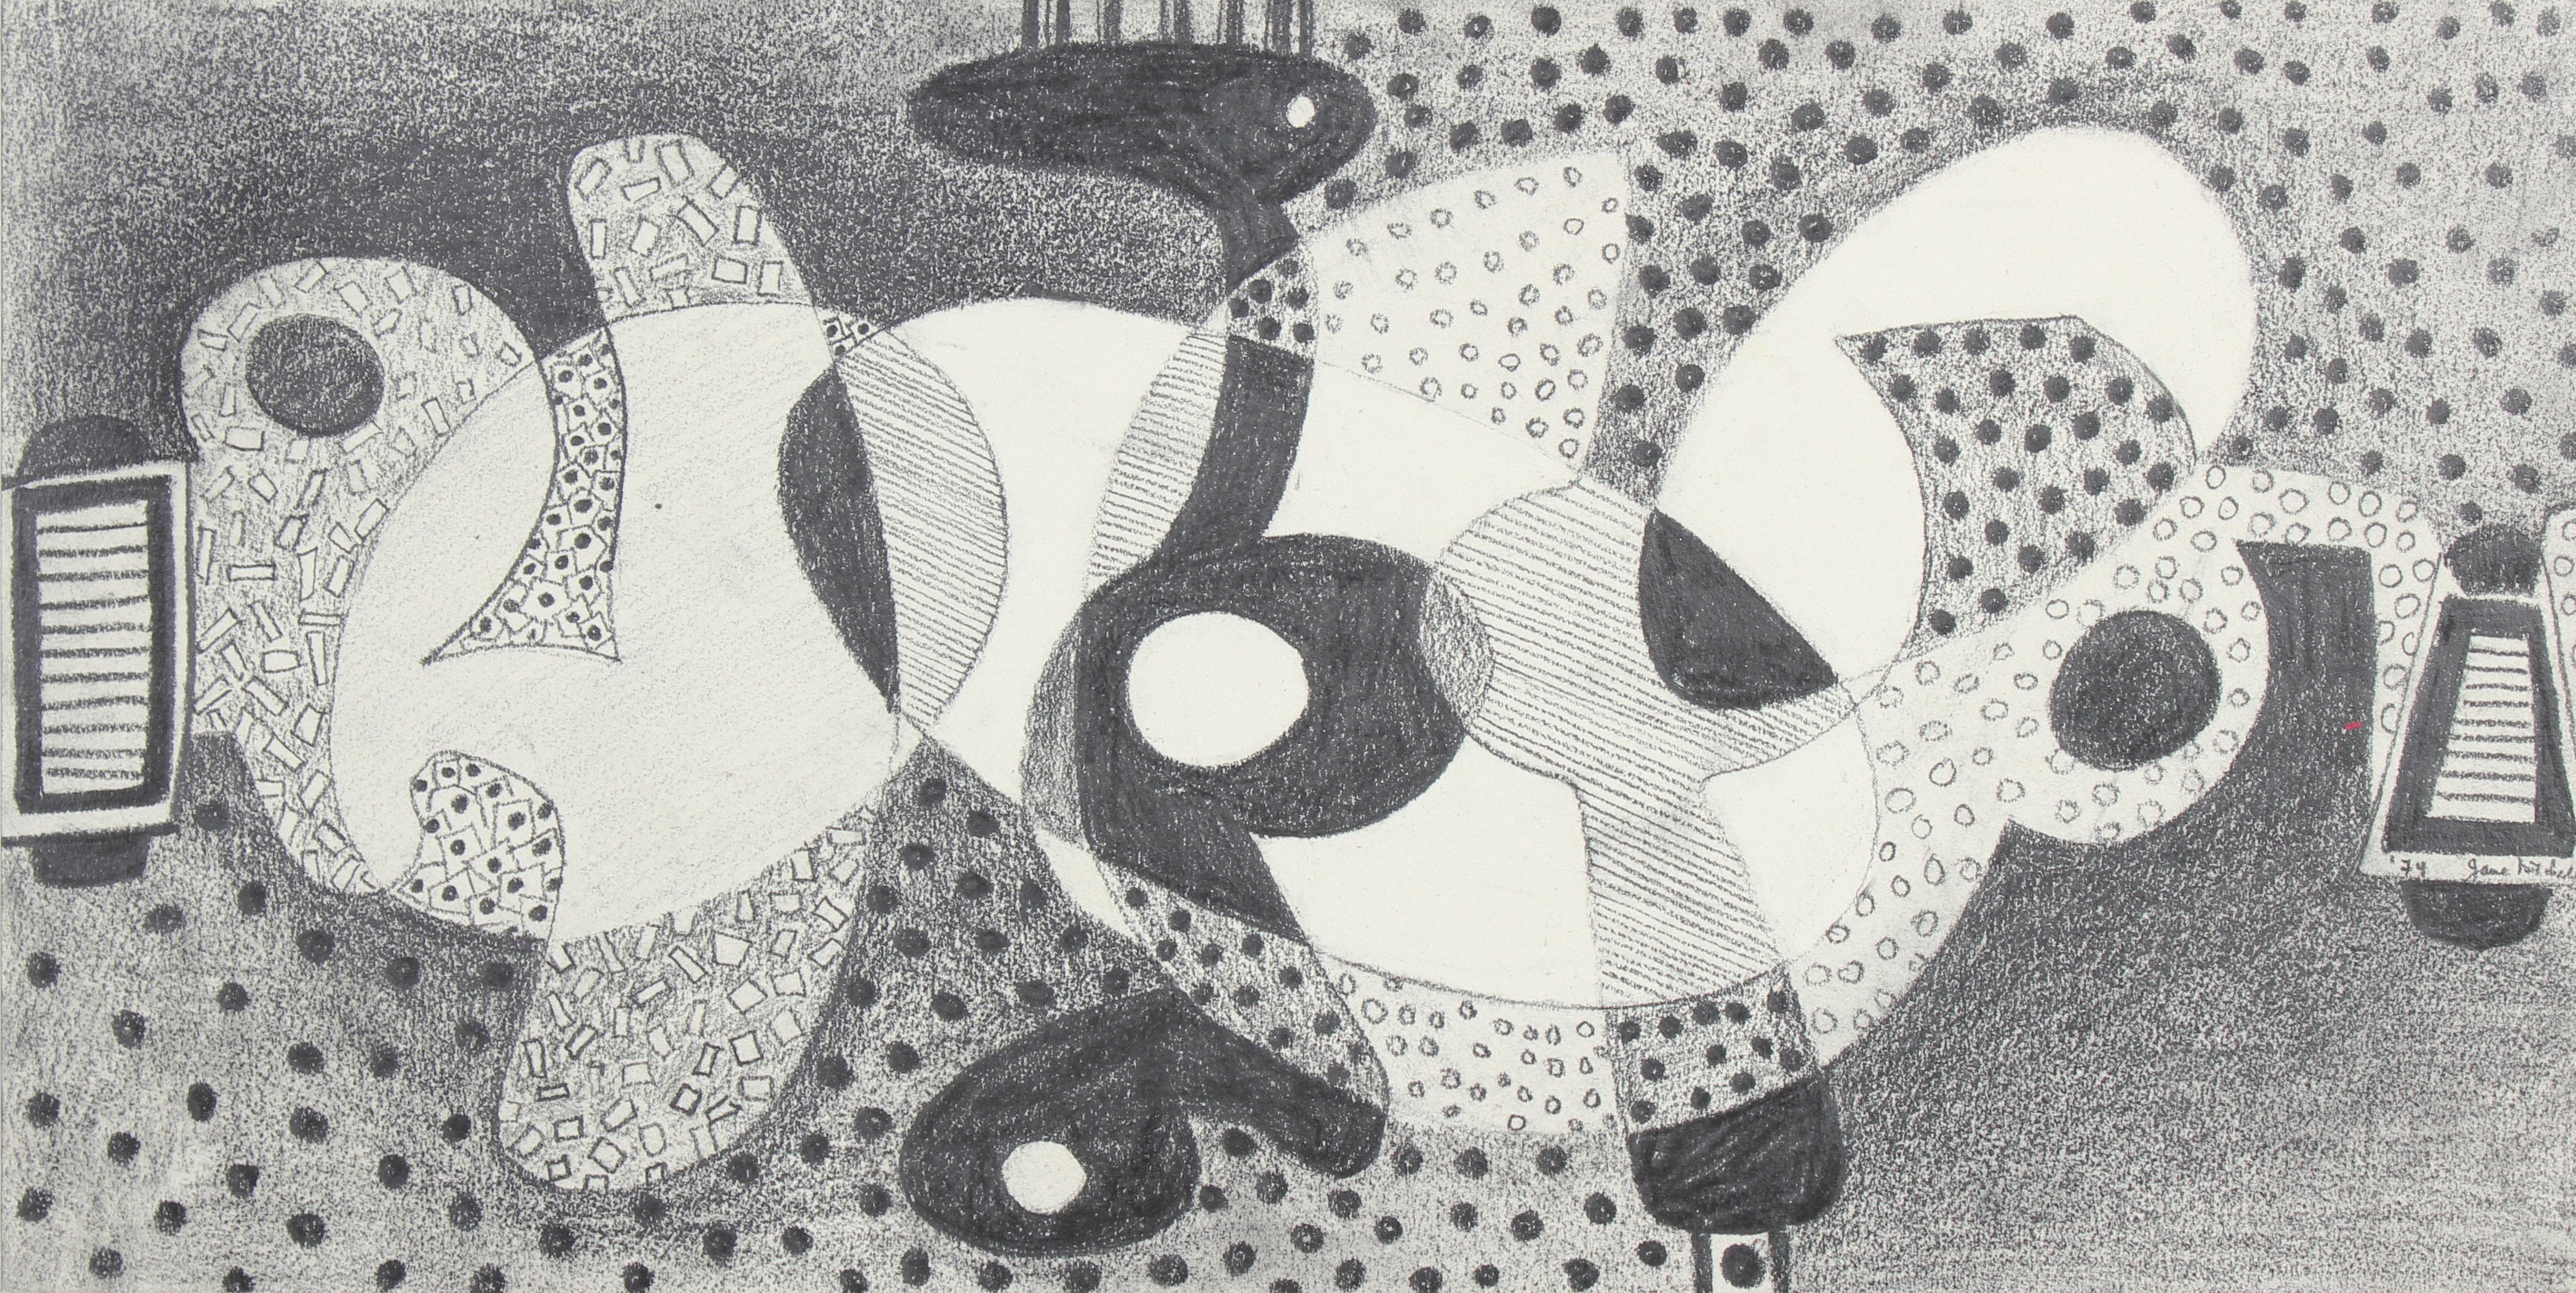 Jane Mitchell Abstract Drawing - Optical Art Abstract in Graphite, 1974